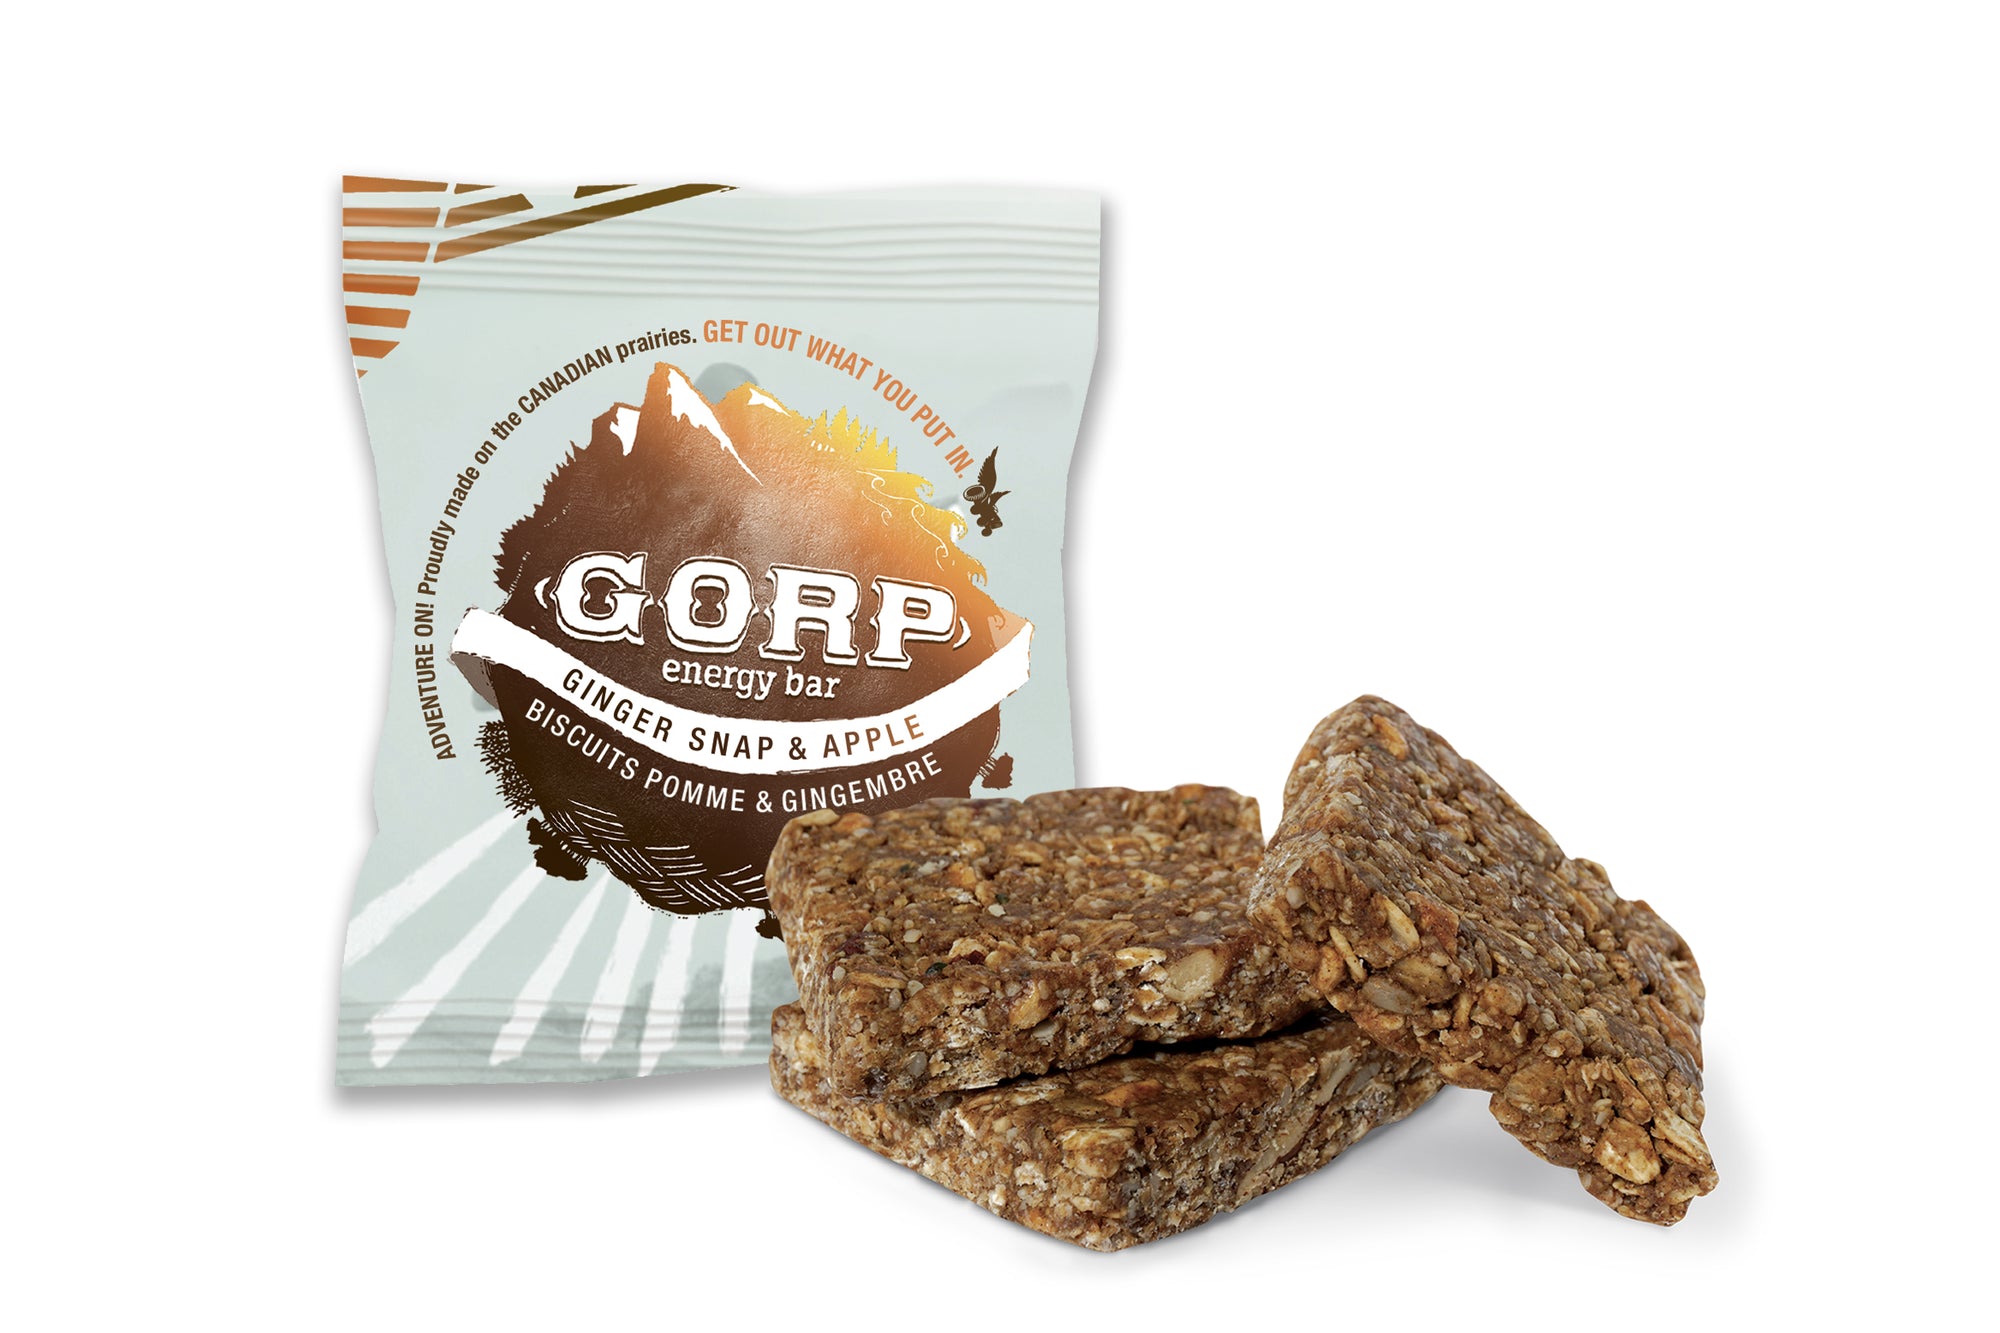 NEW FLAVOUR! Ginger Snap & Apple - Better than Cocoa, Hemp & Almond??